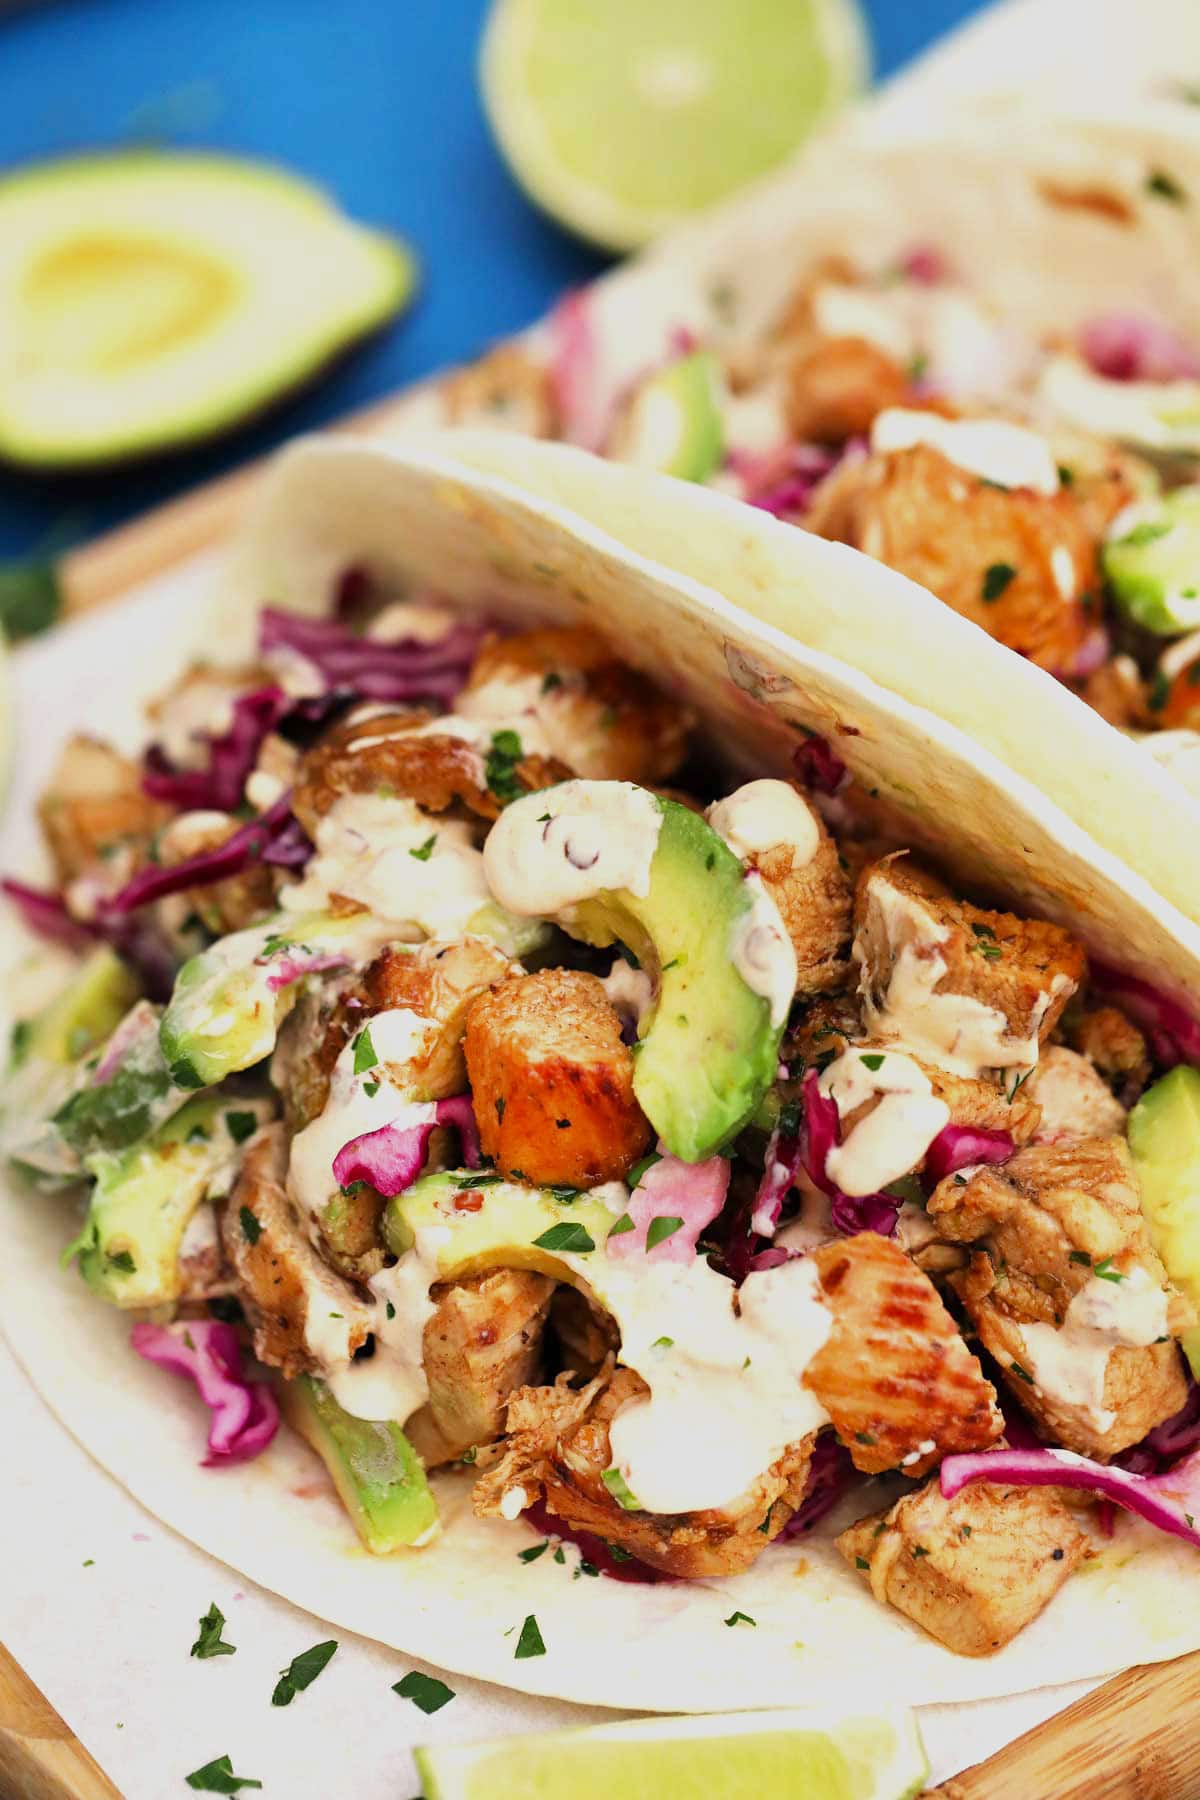 Chipotle Chicken Tacos with Chipotle Sauce [Video] - Sweet and Savory Meals